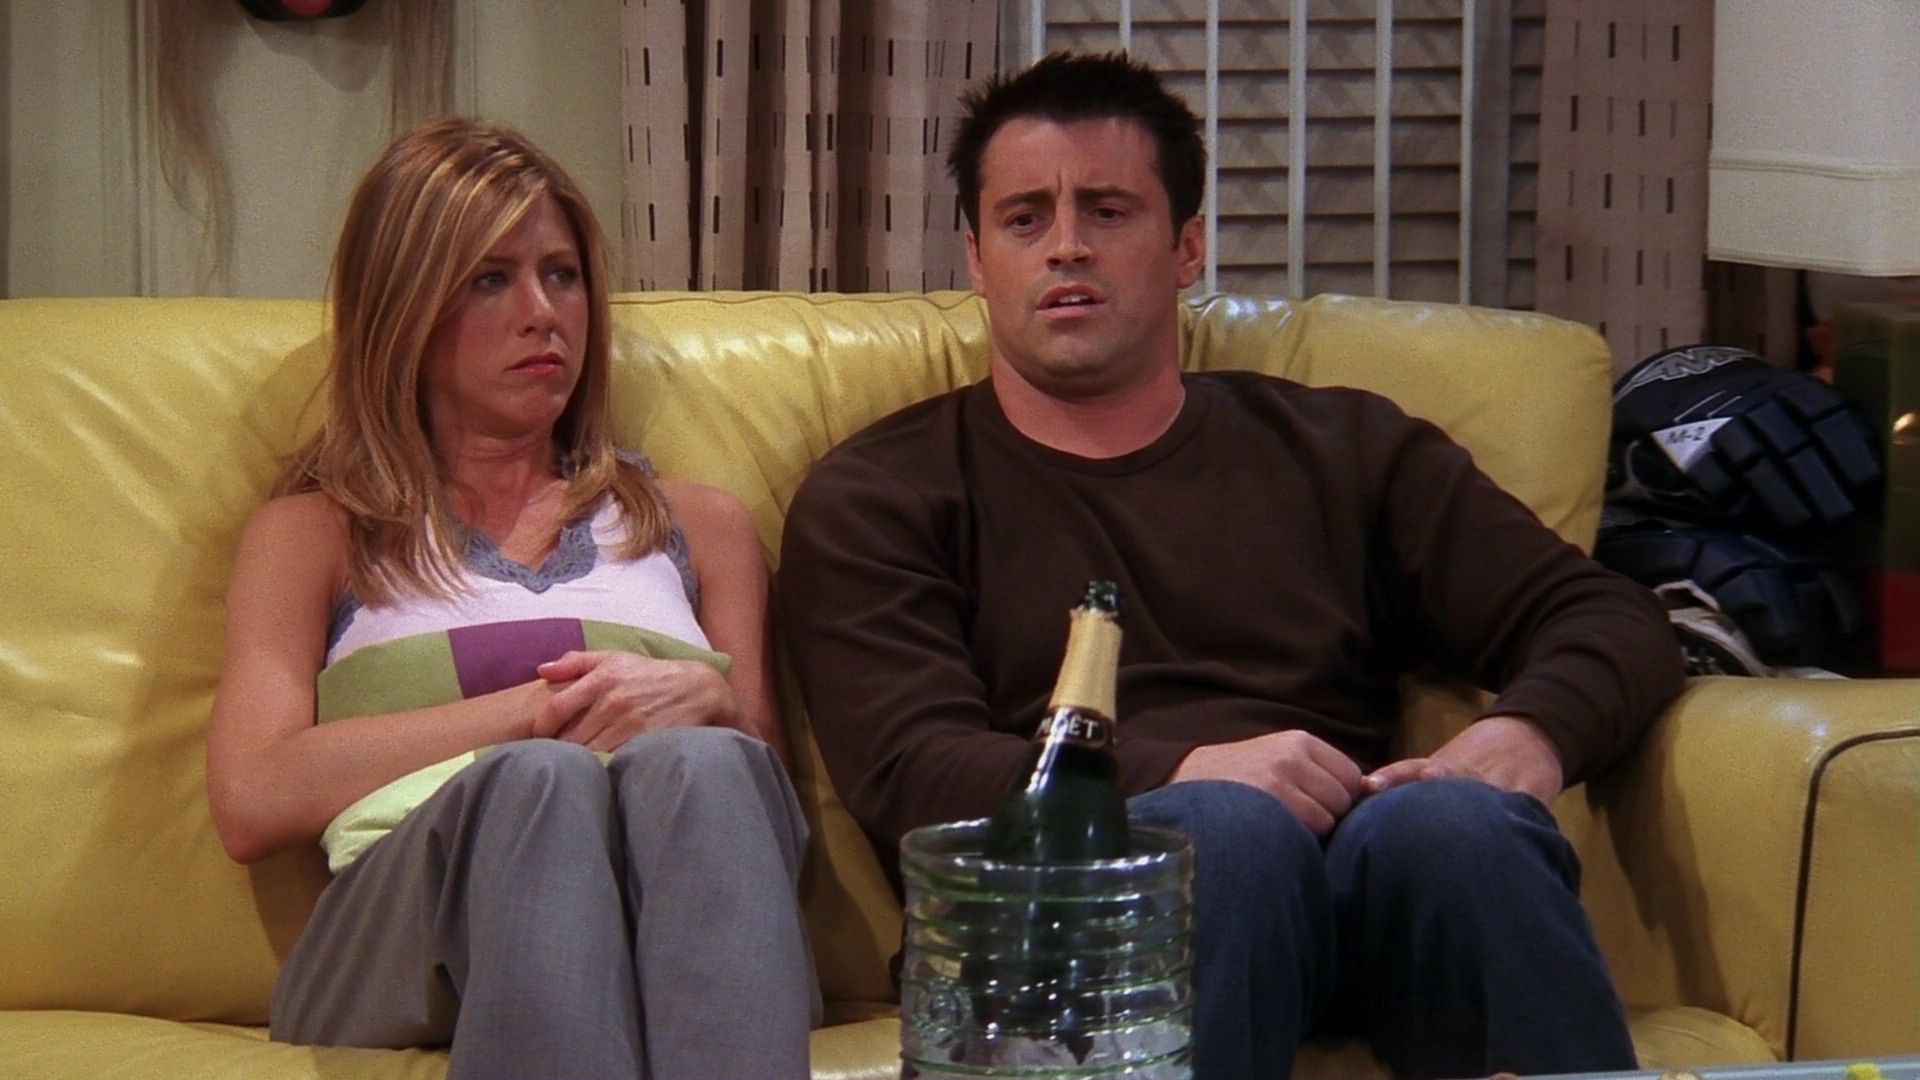 Friends: 23 Crazy Revelations About Joey And Rachel's Relationship